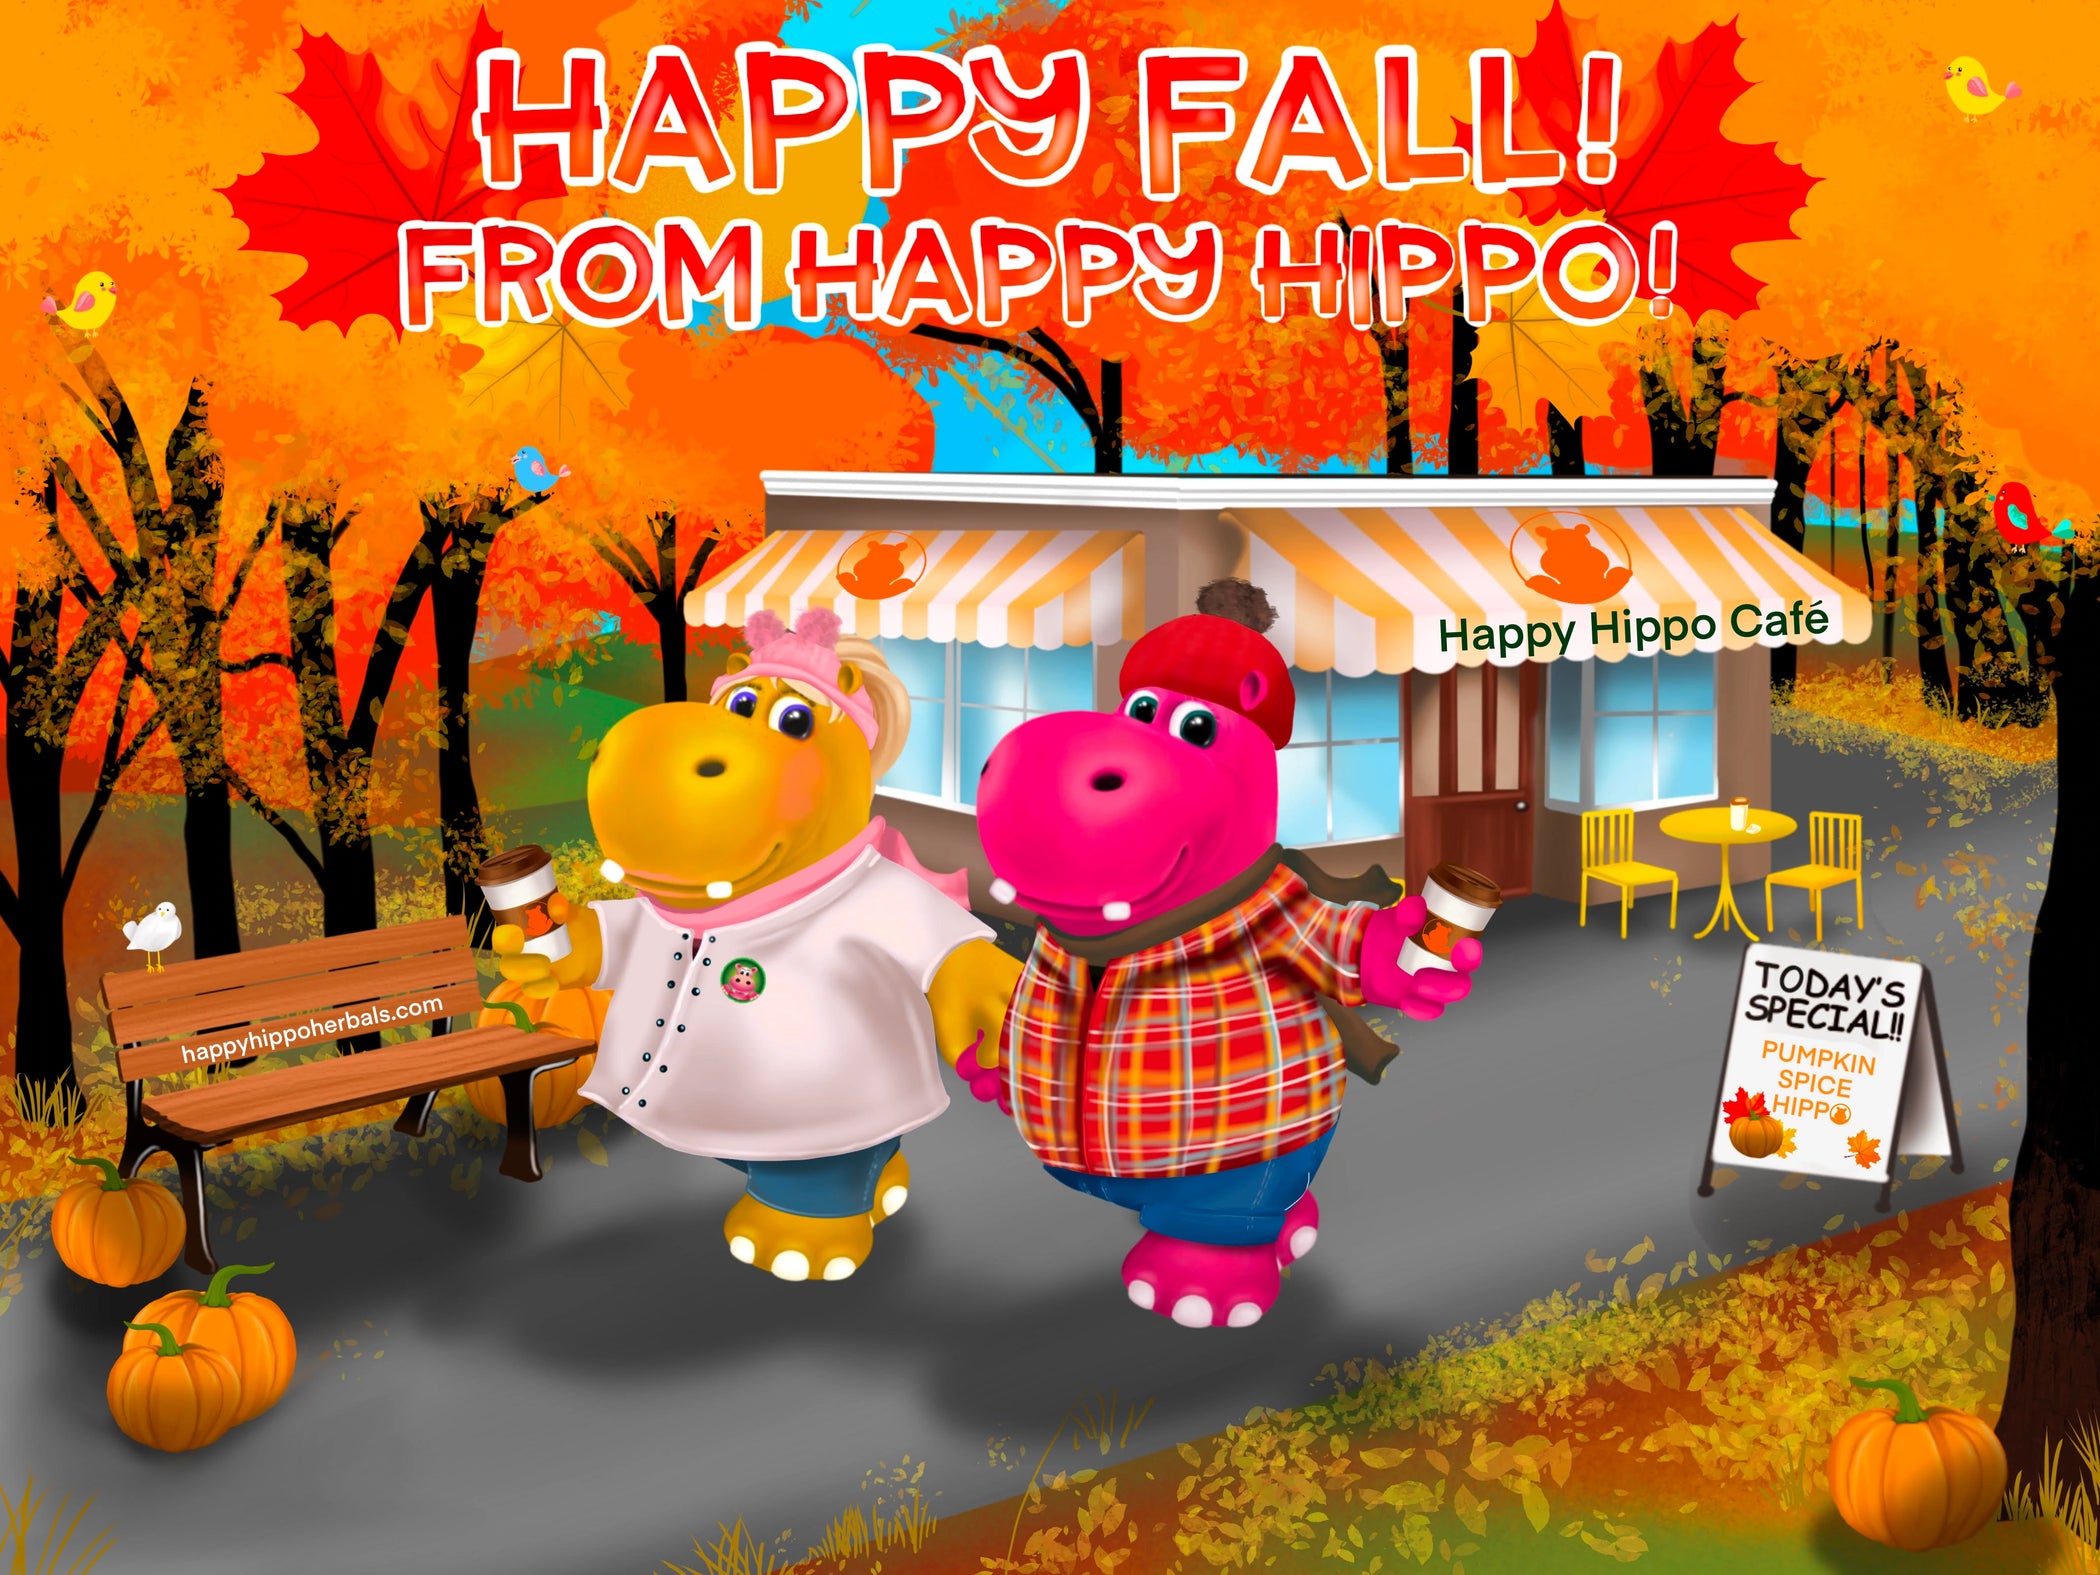 Graphic Designed image depicting Puddles and Bubbles the Hippo characters enjoying the fall scenery along a walking path, and enjoying large cups of Happy Hippo brand kratom tea, made from the world's best kratom powder.